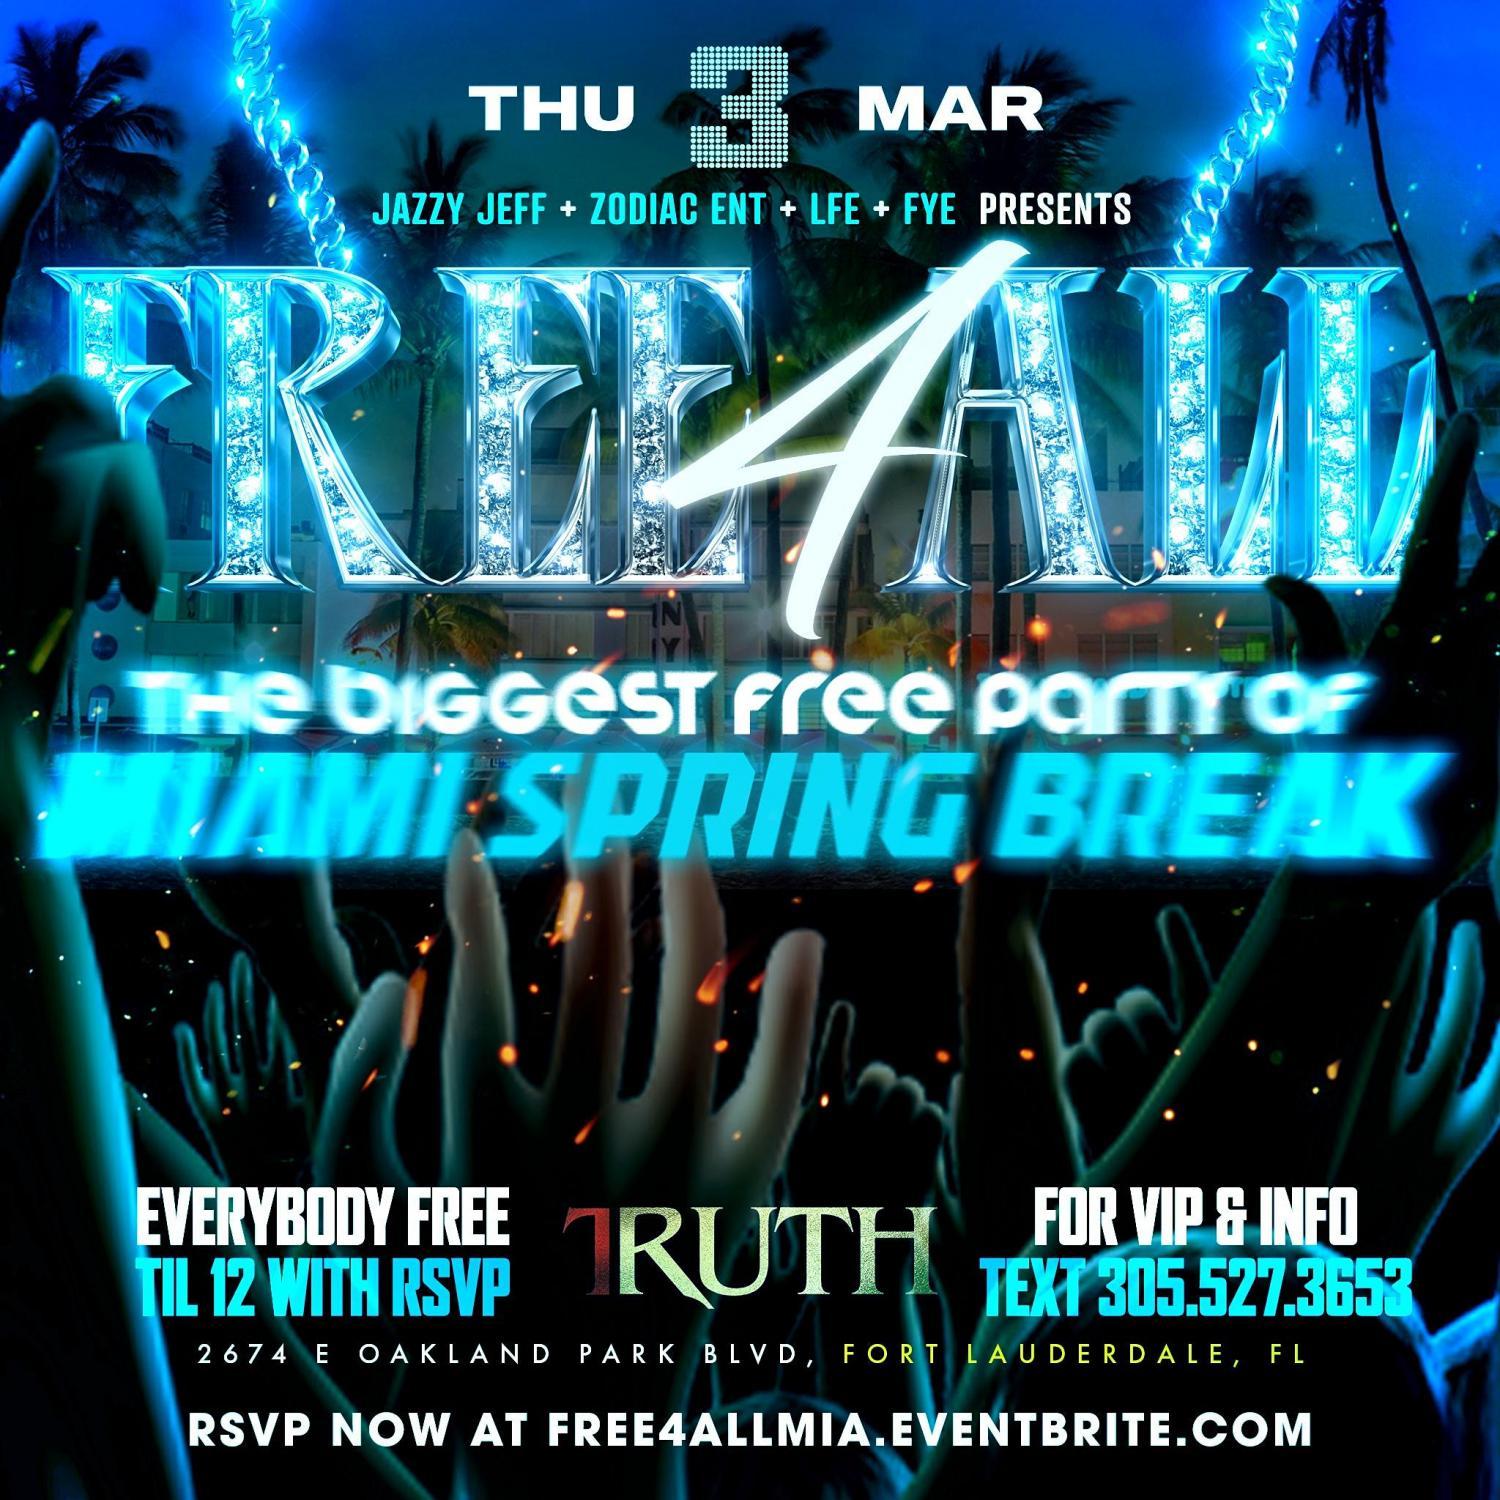 FREE-4-ALL: THE BIGGEST FREE EVENT OF SPRING BREAK!